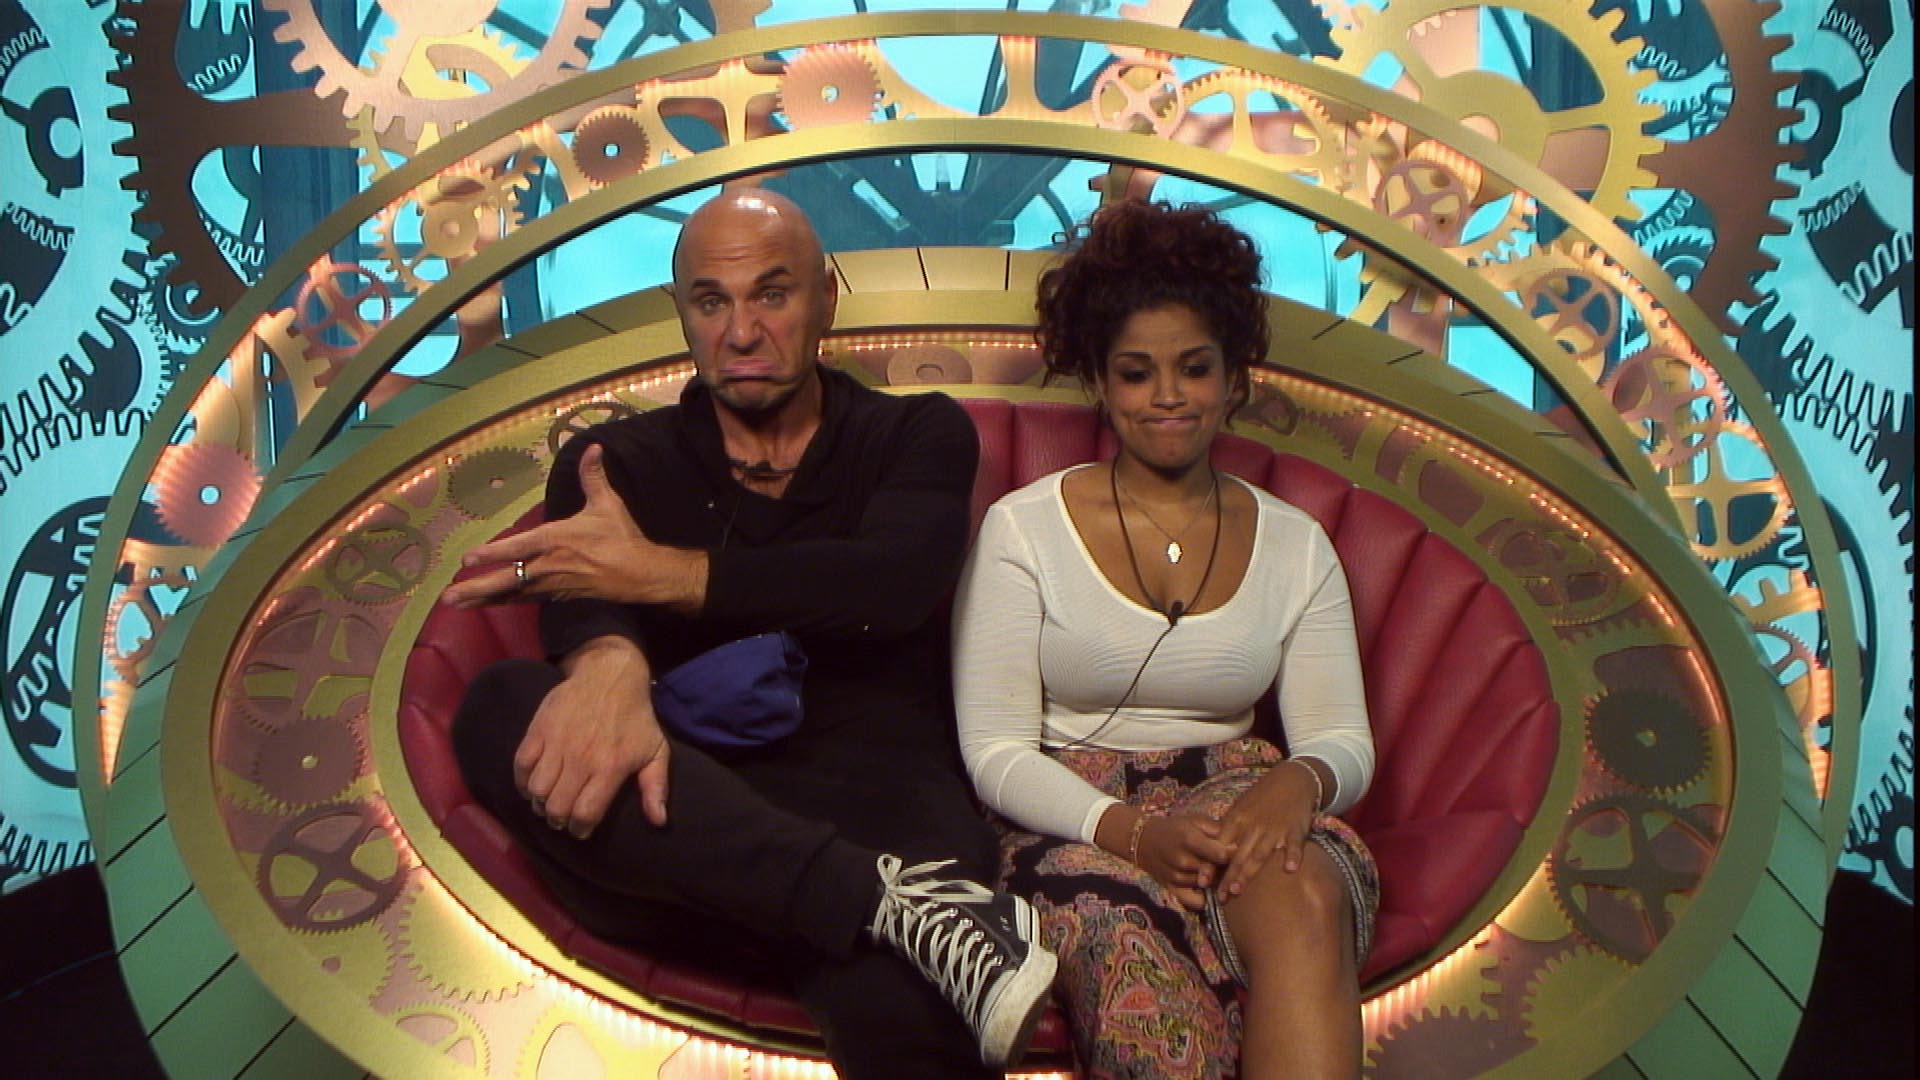 Day 22: Big Brother reveals Sam and Simon as secret nominating Housemates